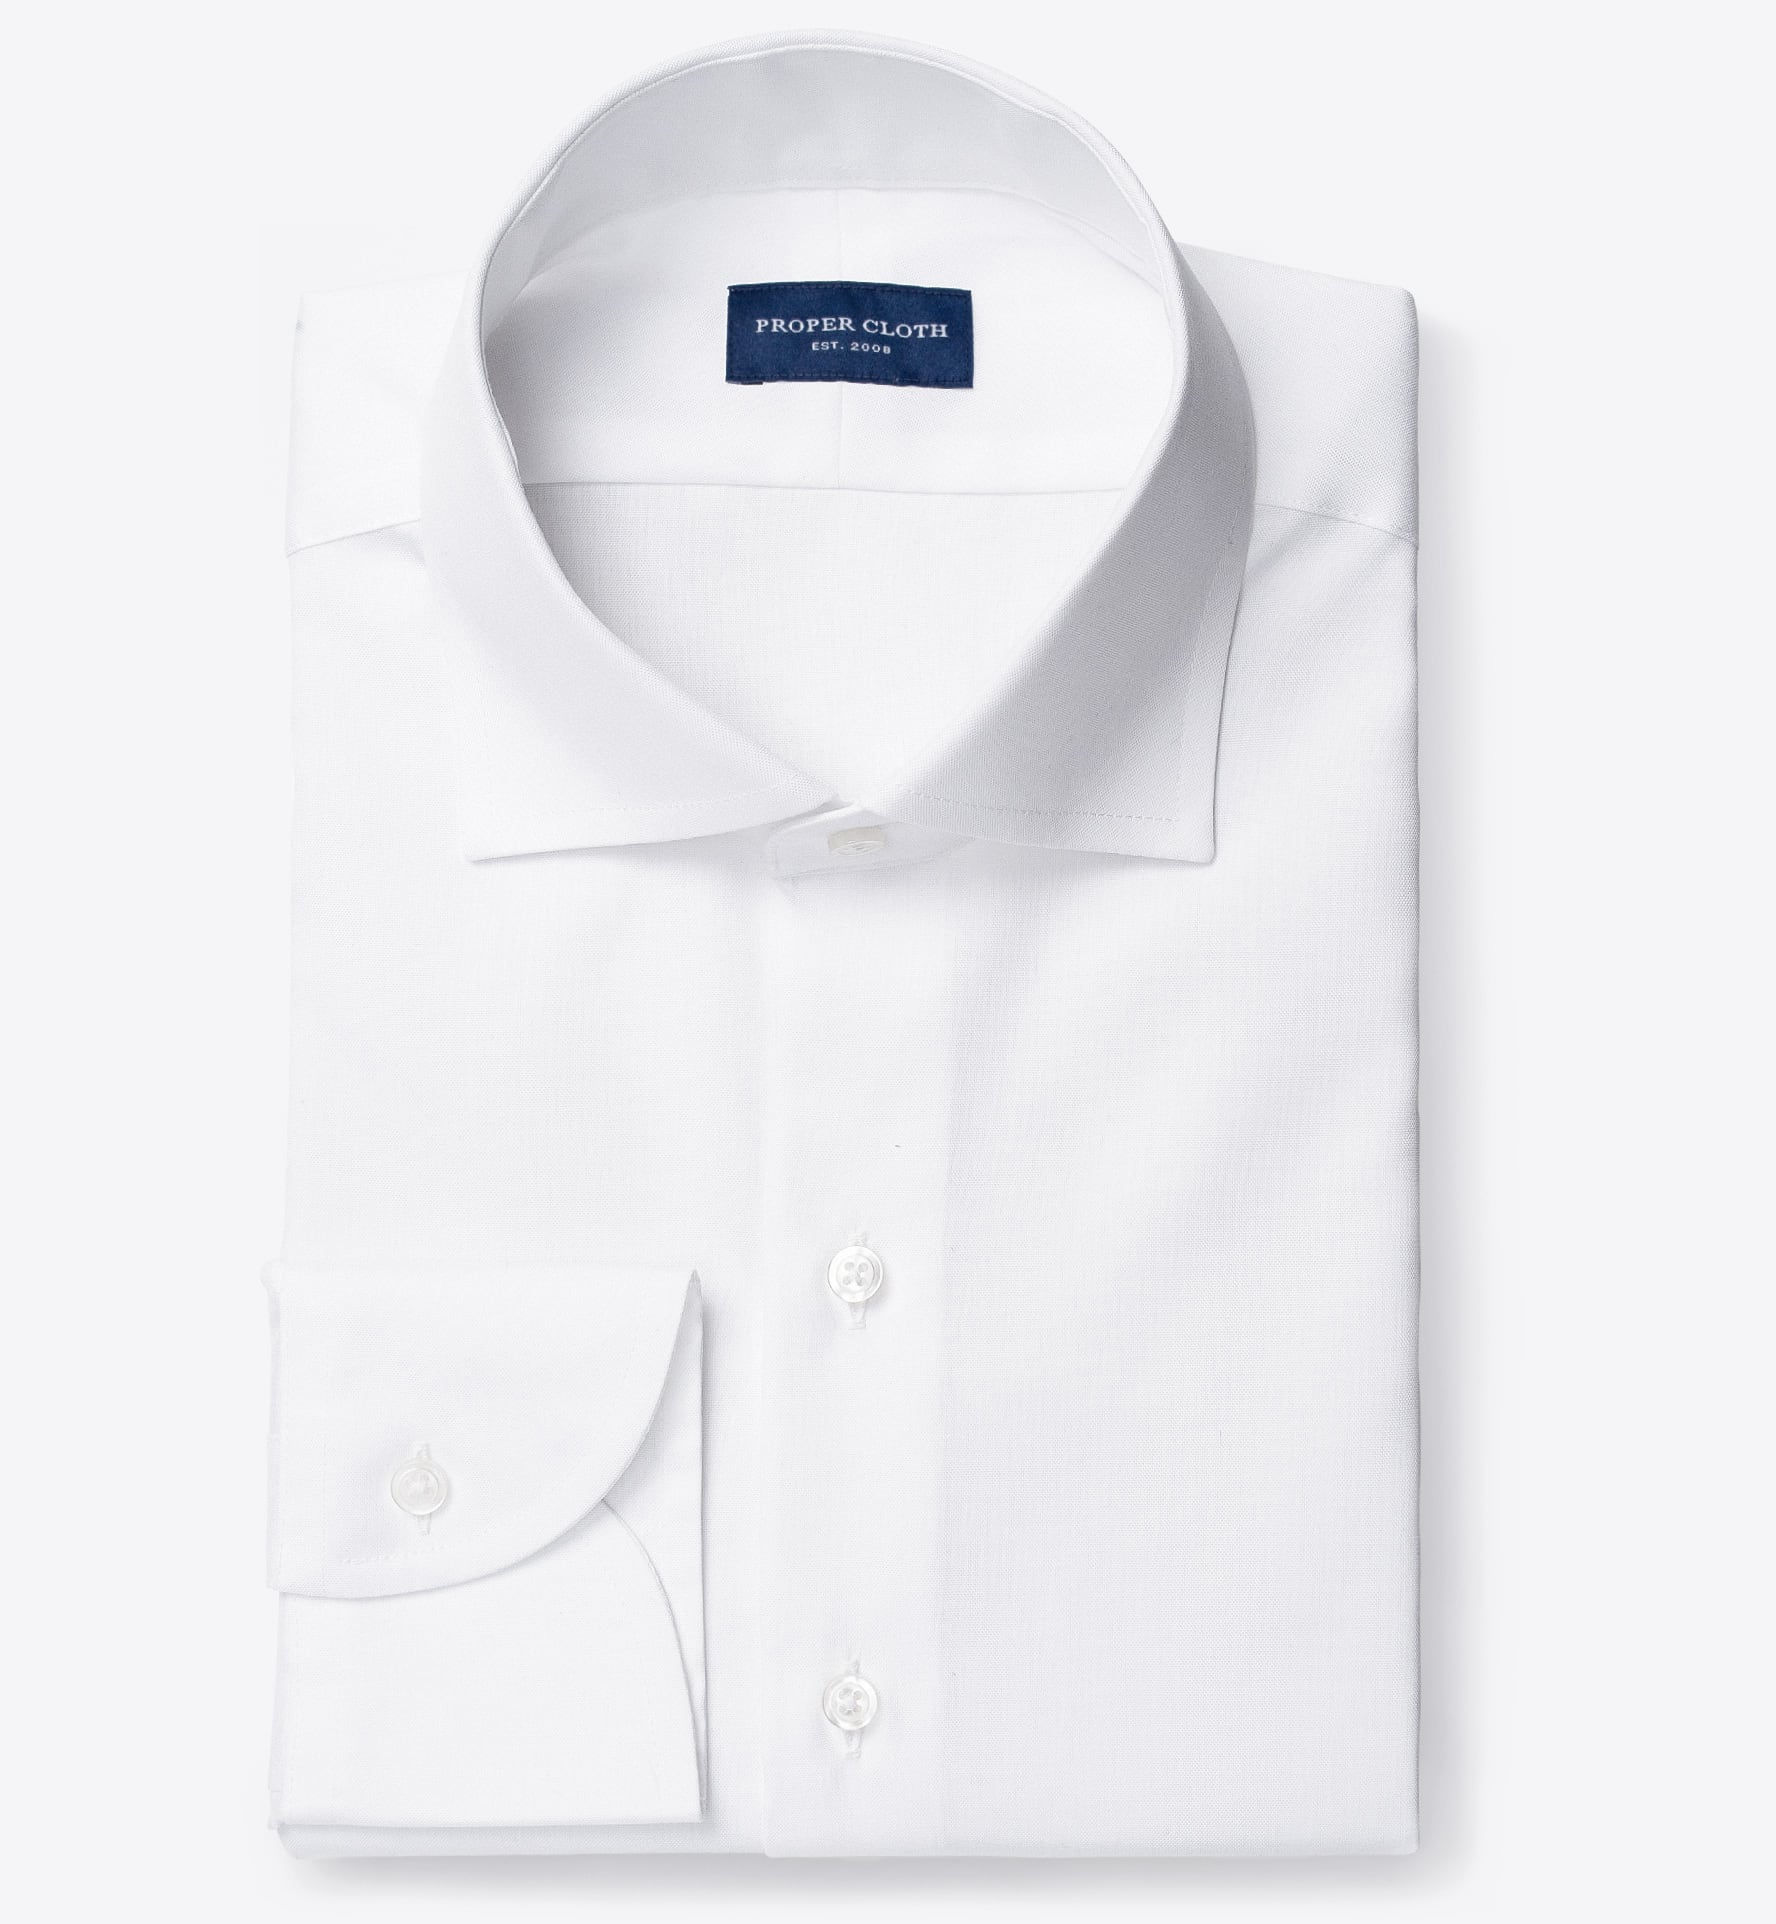 Mayfair Wrinkle-Resistant White Pinpoint Fitted Dress Shirt by Proper Cloth